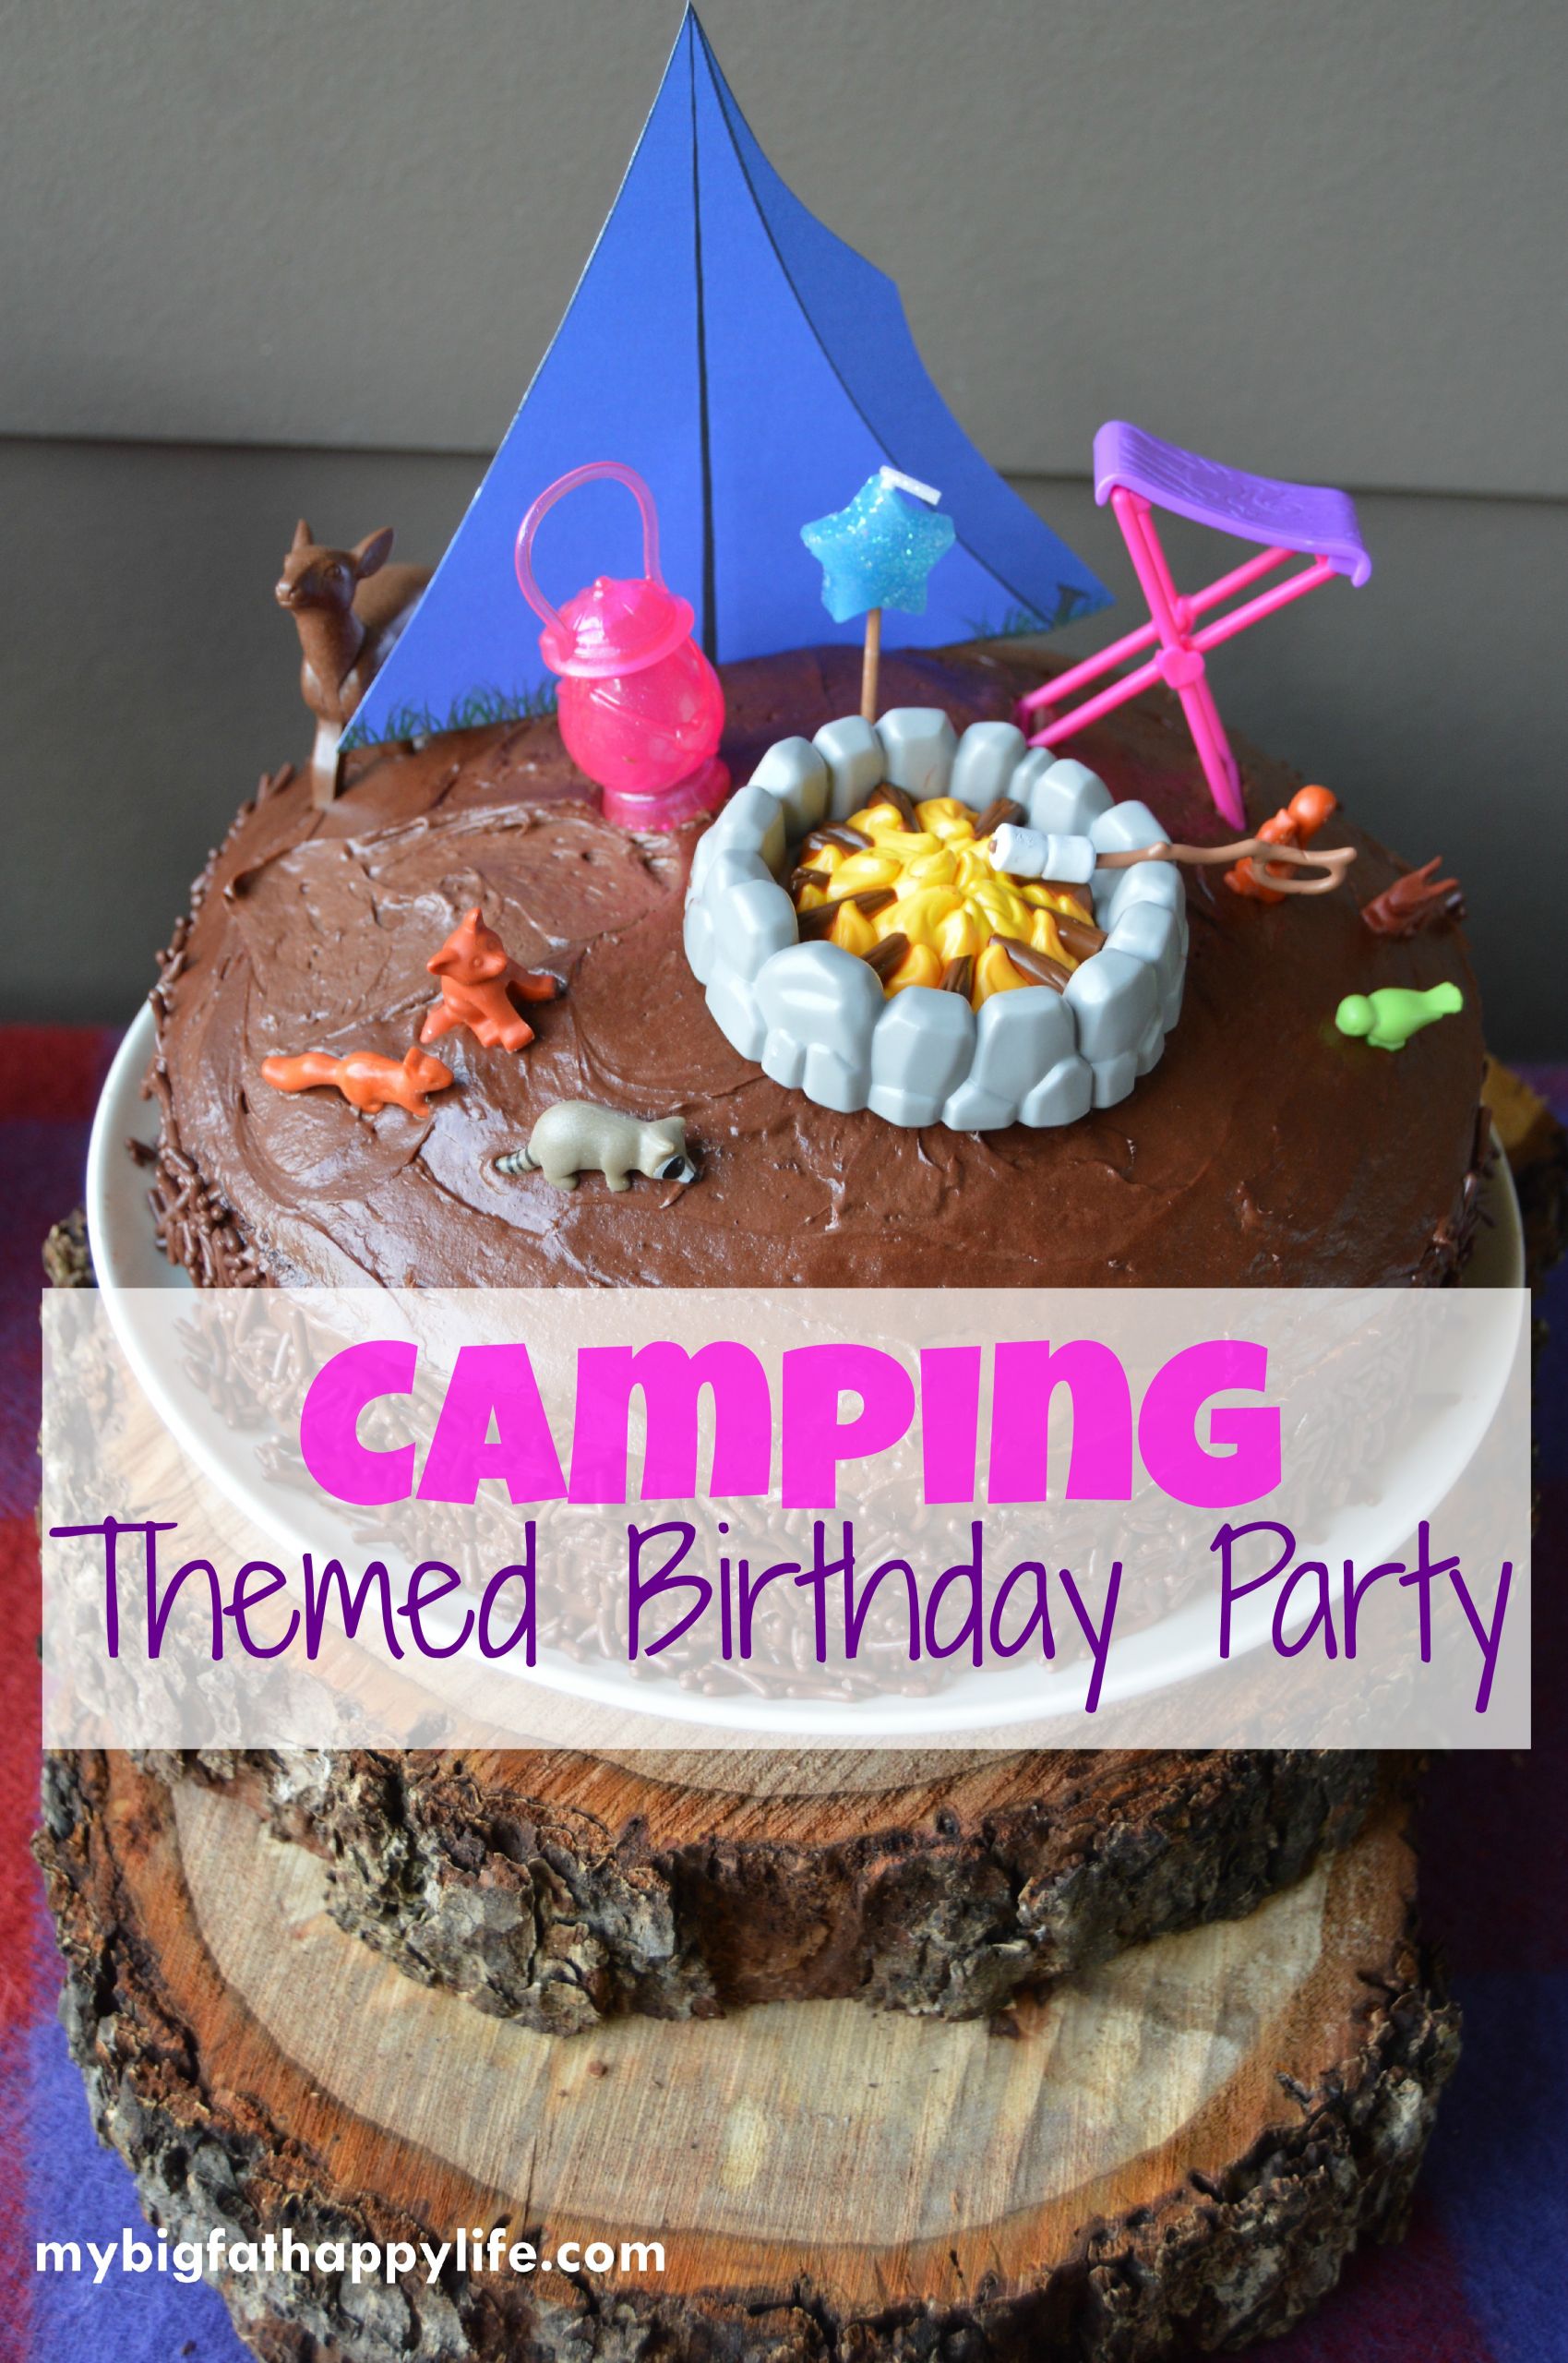 Camping Themed Birthday Party
 Camping Themed Birthday Party My Big Fat Happy Life